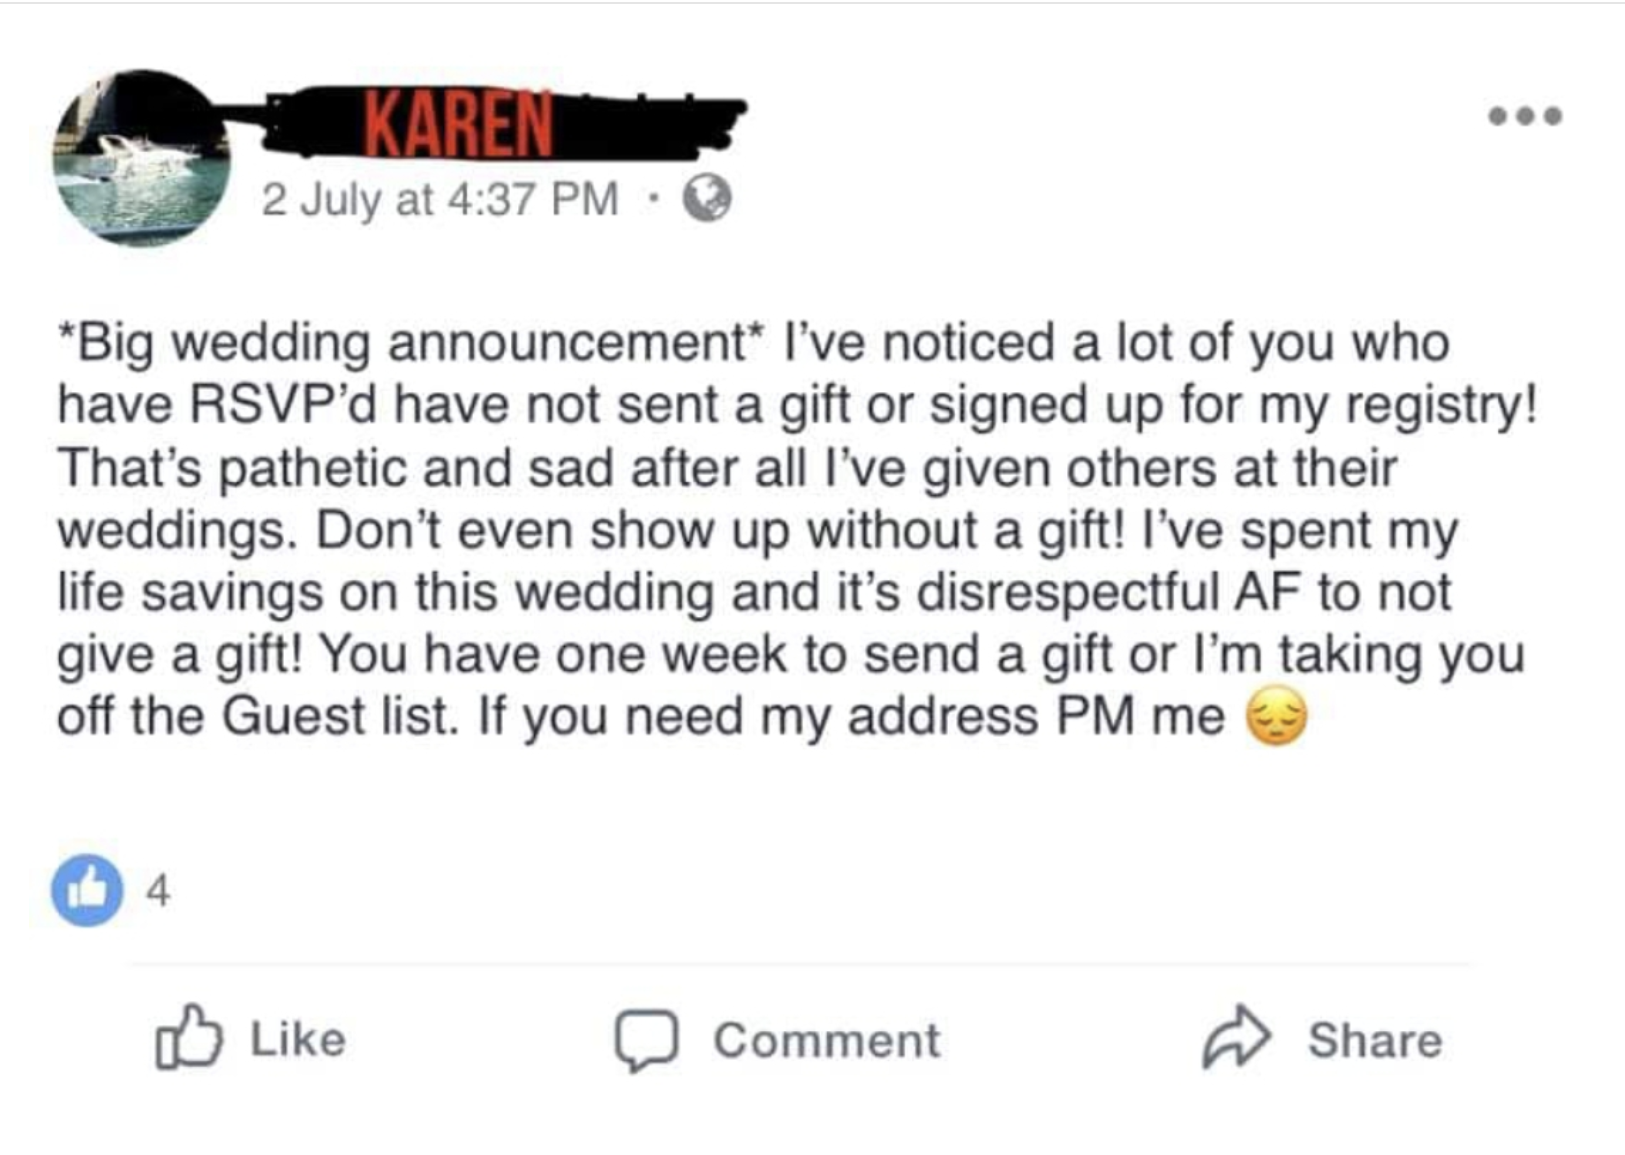 &quot;I&#x27;ve noticed a lot of you who have RSVP&#x27;d have not sent a gift&quot;